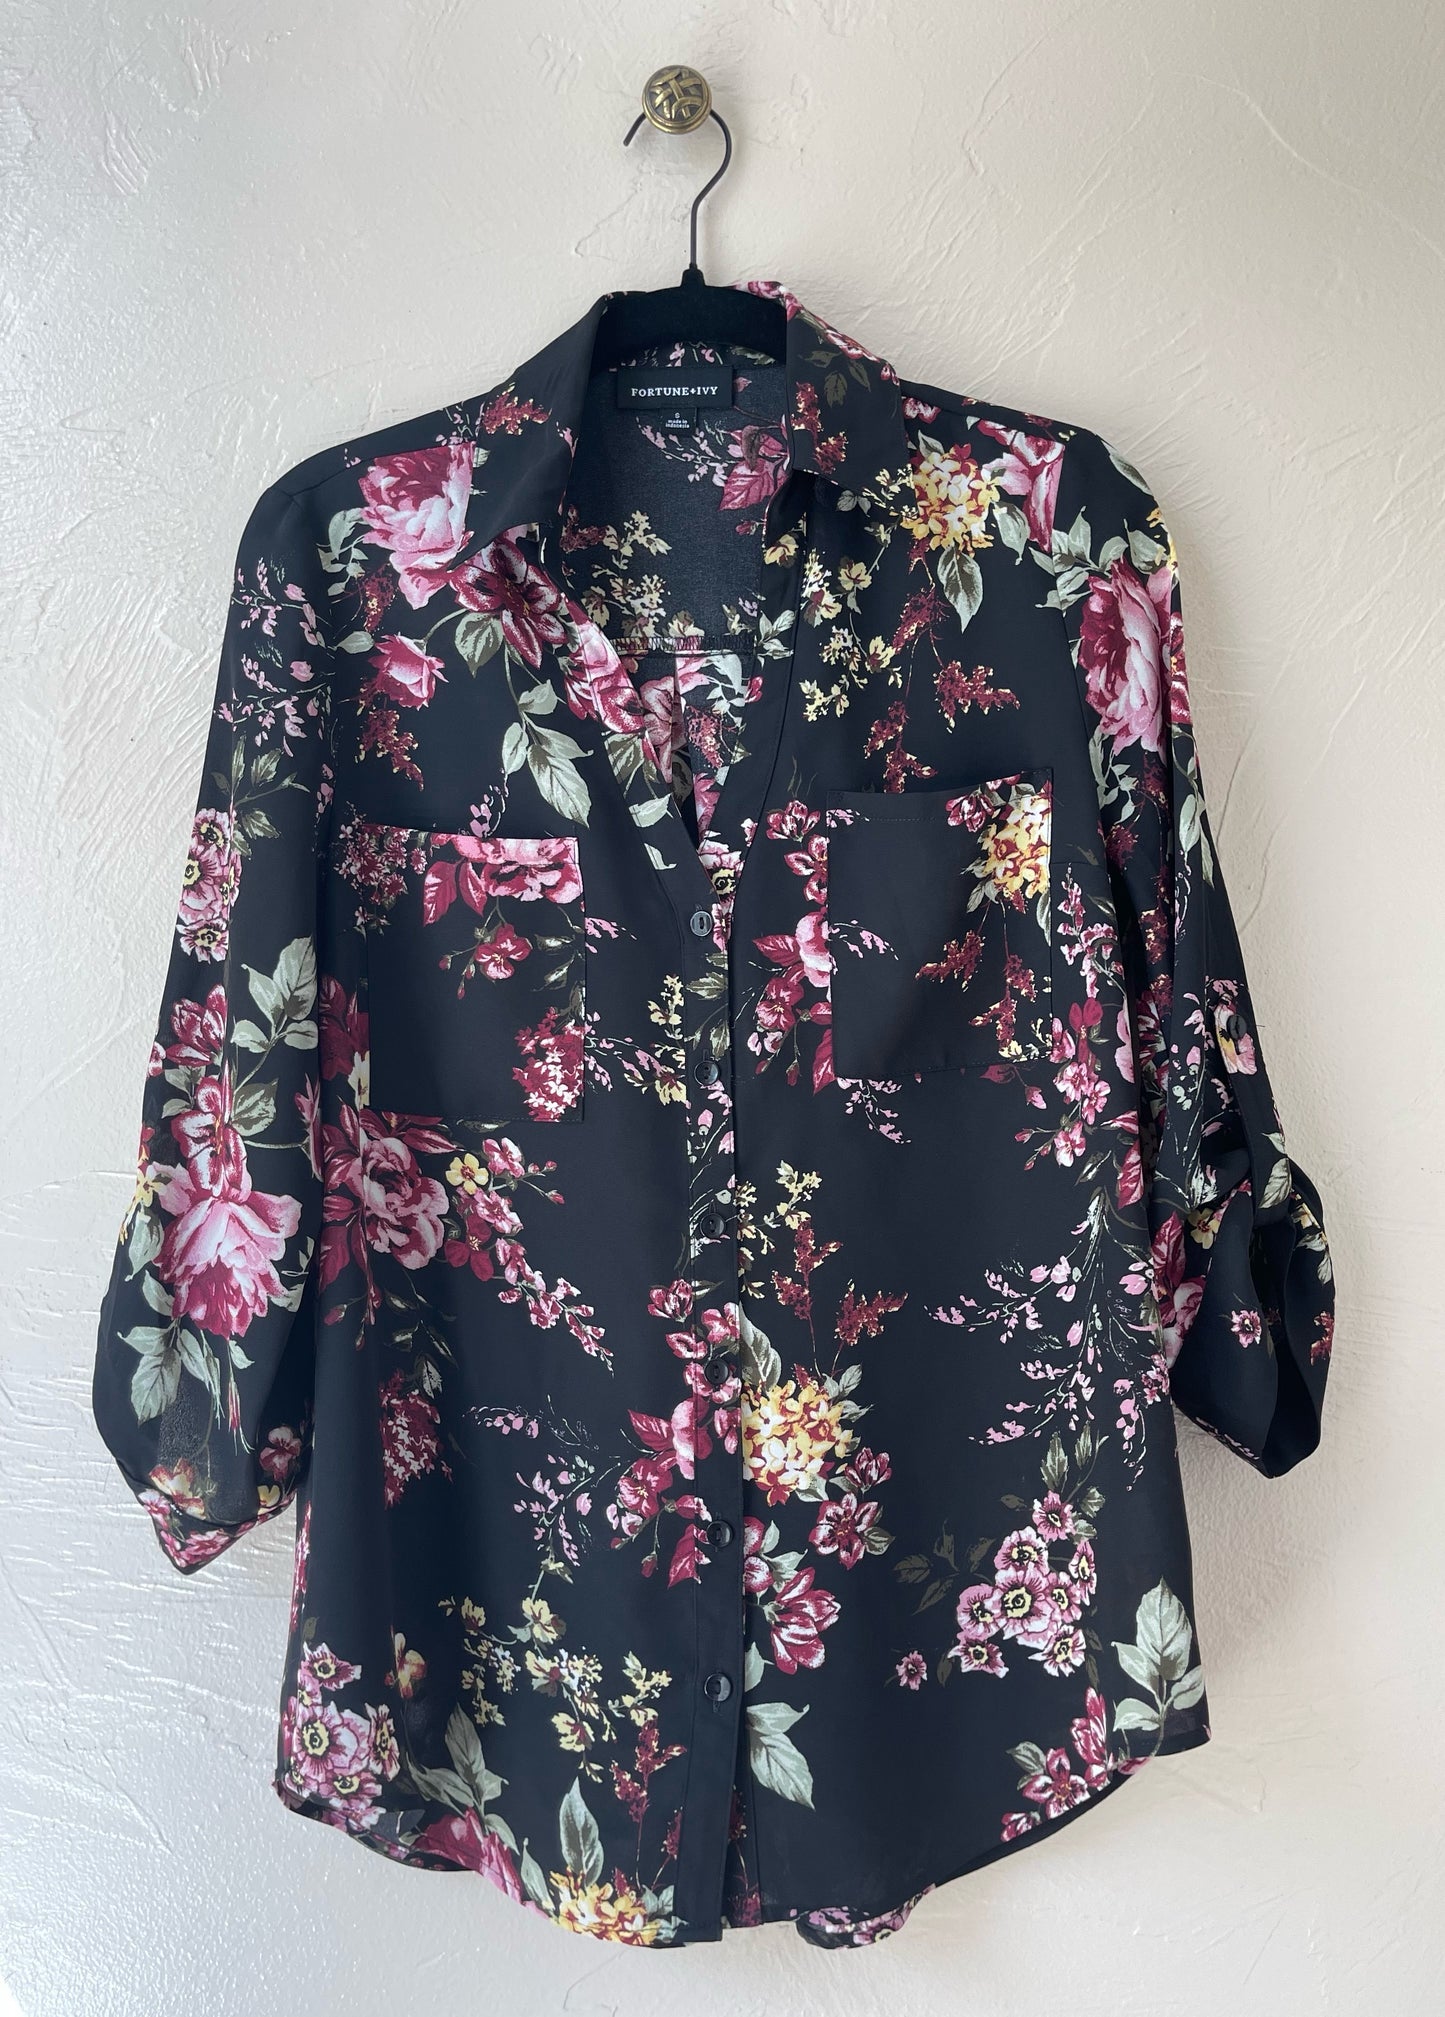 Shades of Pink & Burgundy Flowers Button Down Shirt